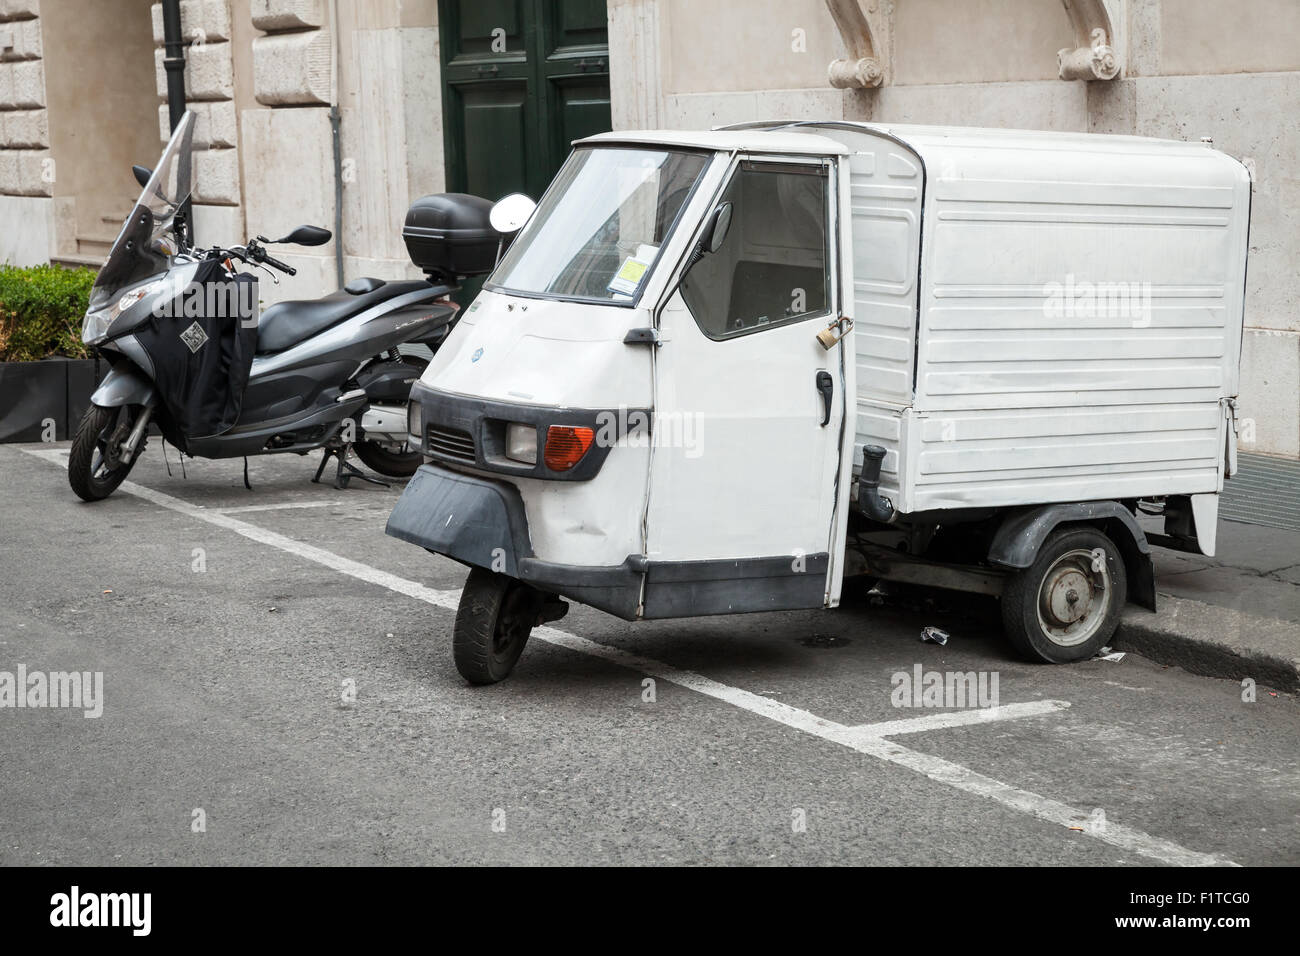 Rome, Italy - August 07, 2015: White Piaggio APE 50 Van stands parked on a roadside in Rome with padlock on the door Stock Photo